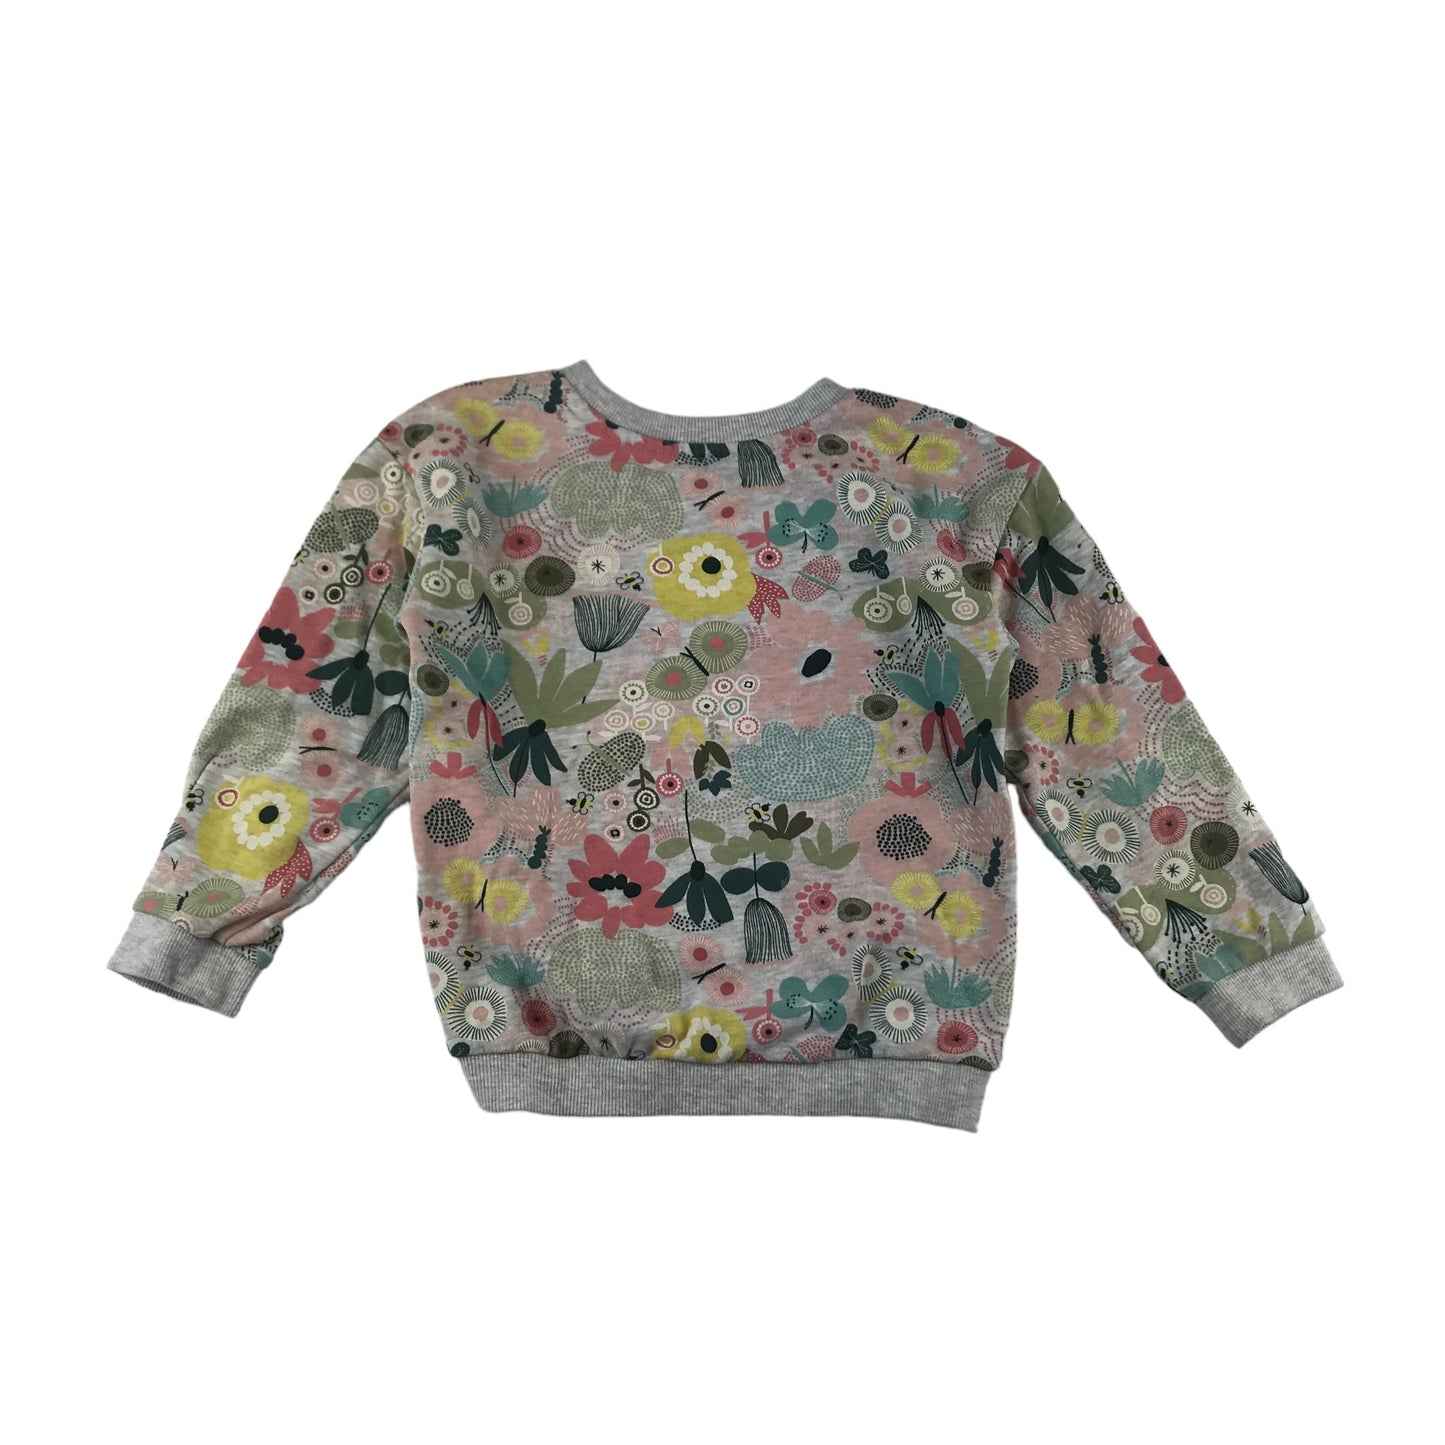 Nutmeg Sweater Age 6 Grey Graphic Floral Print Pattern